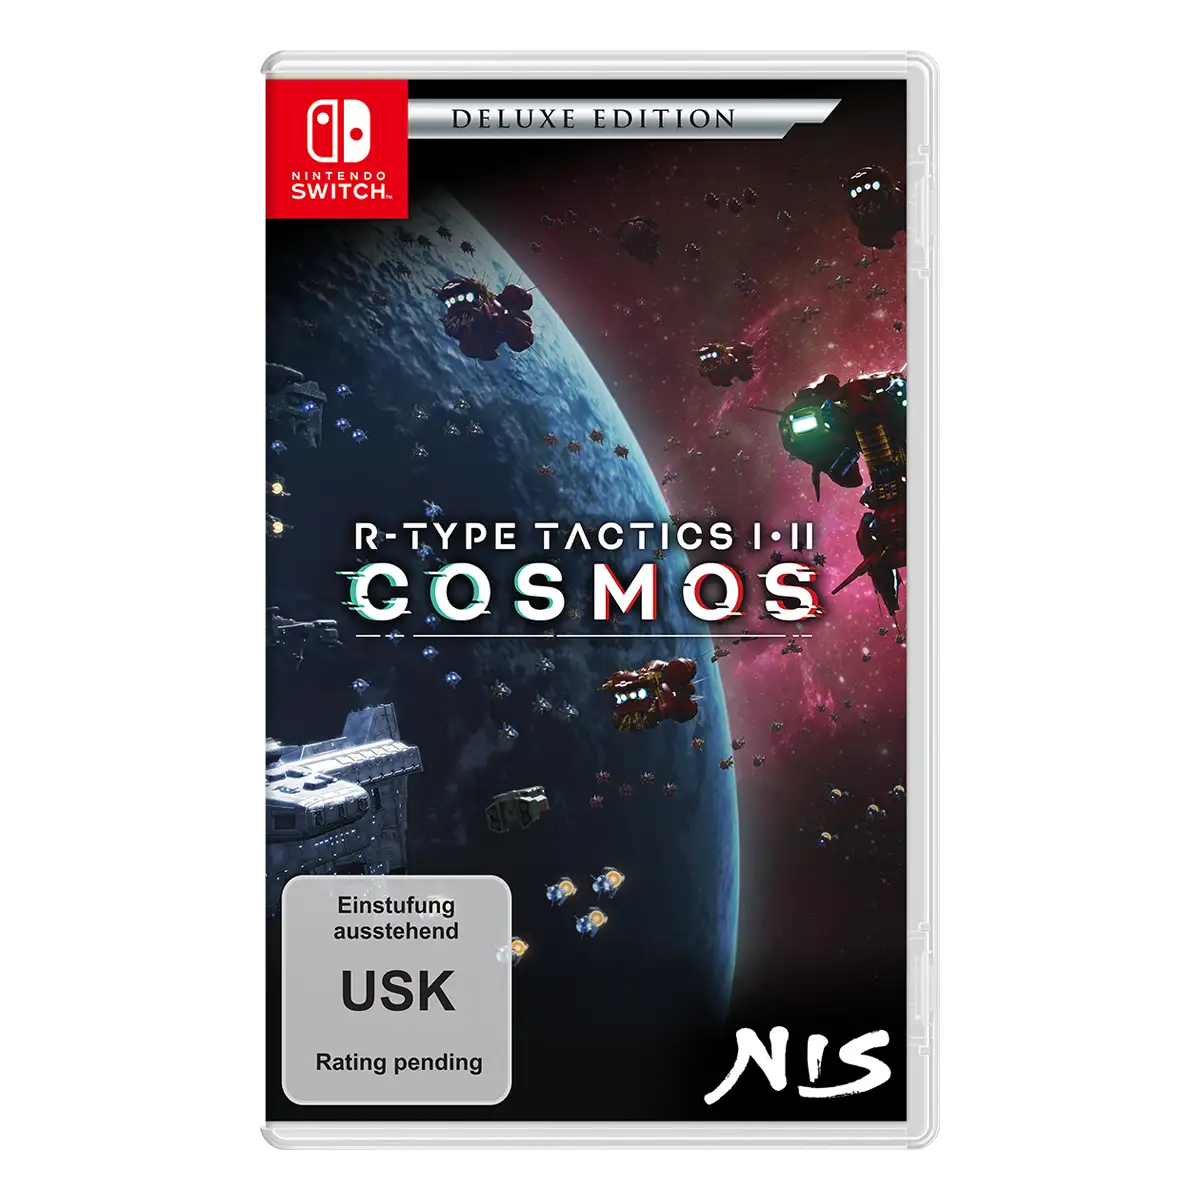 R-Type Tactics 1&2 Cosmos Deluxe Edition (Switch) Thumbnail 1